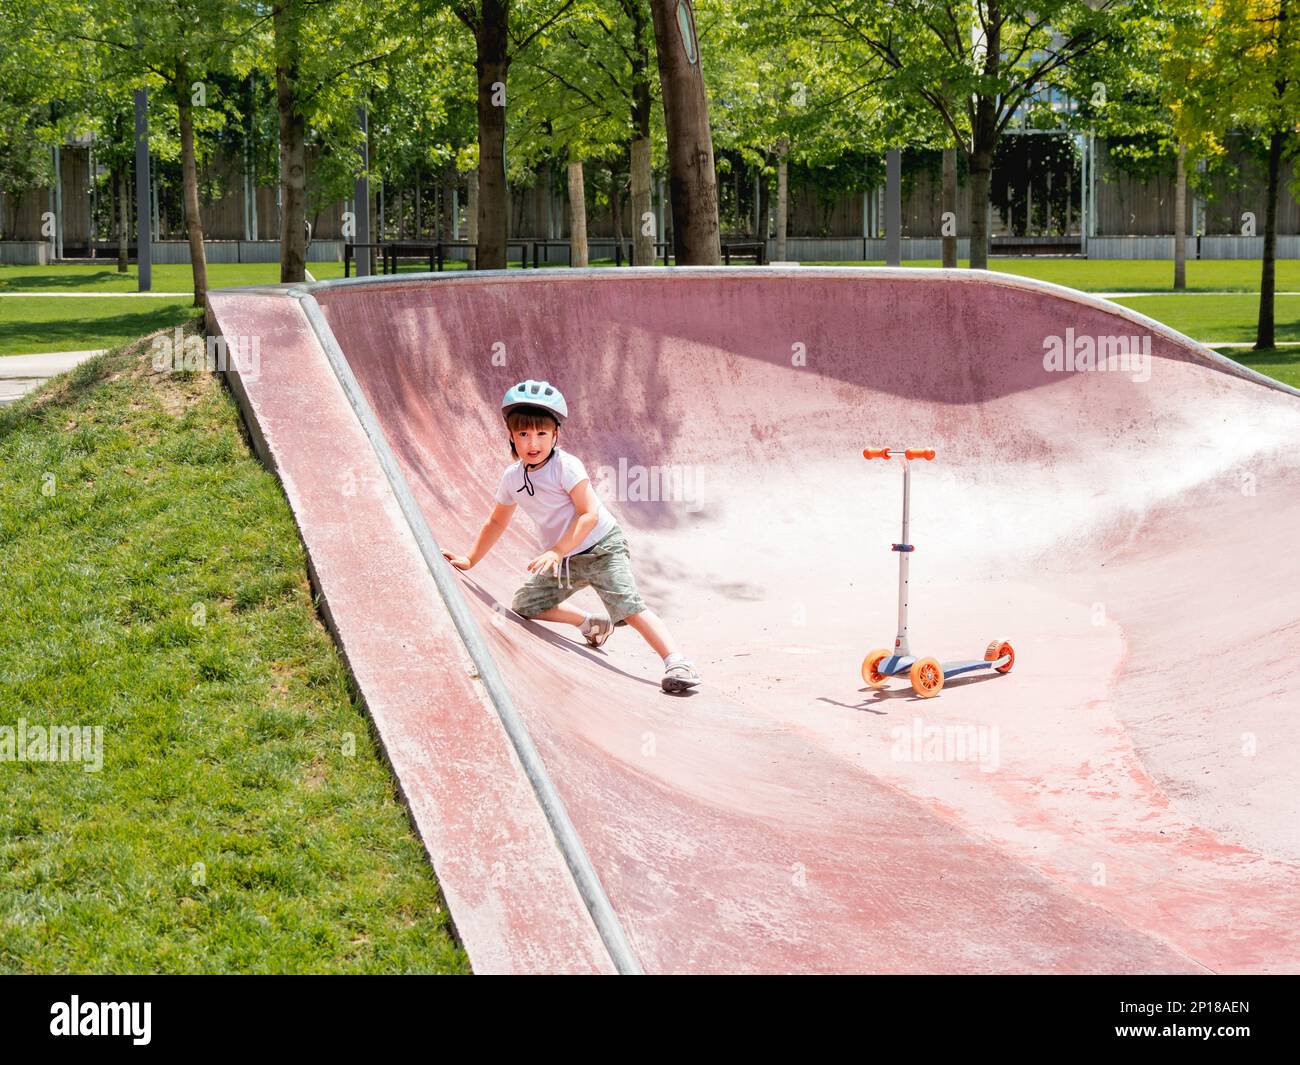 Little boy fell off kick scooter while riding in skate park. Special concrete bowl structures in urban park. Training to skate at summer. Stock Photo